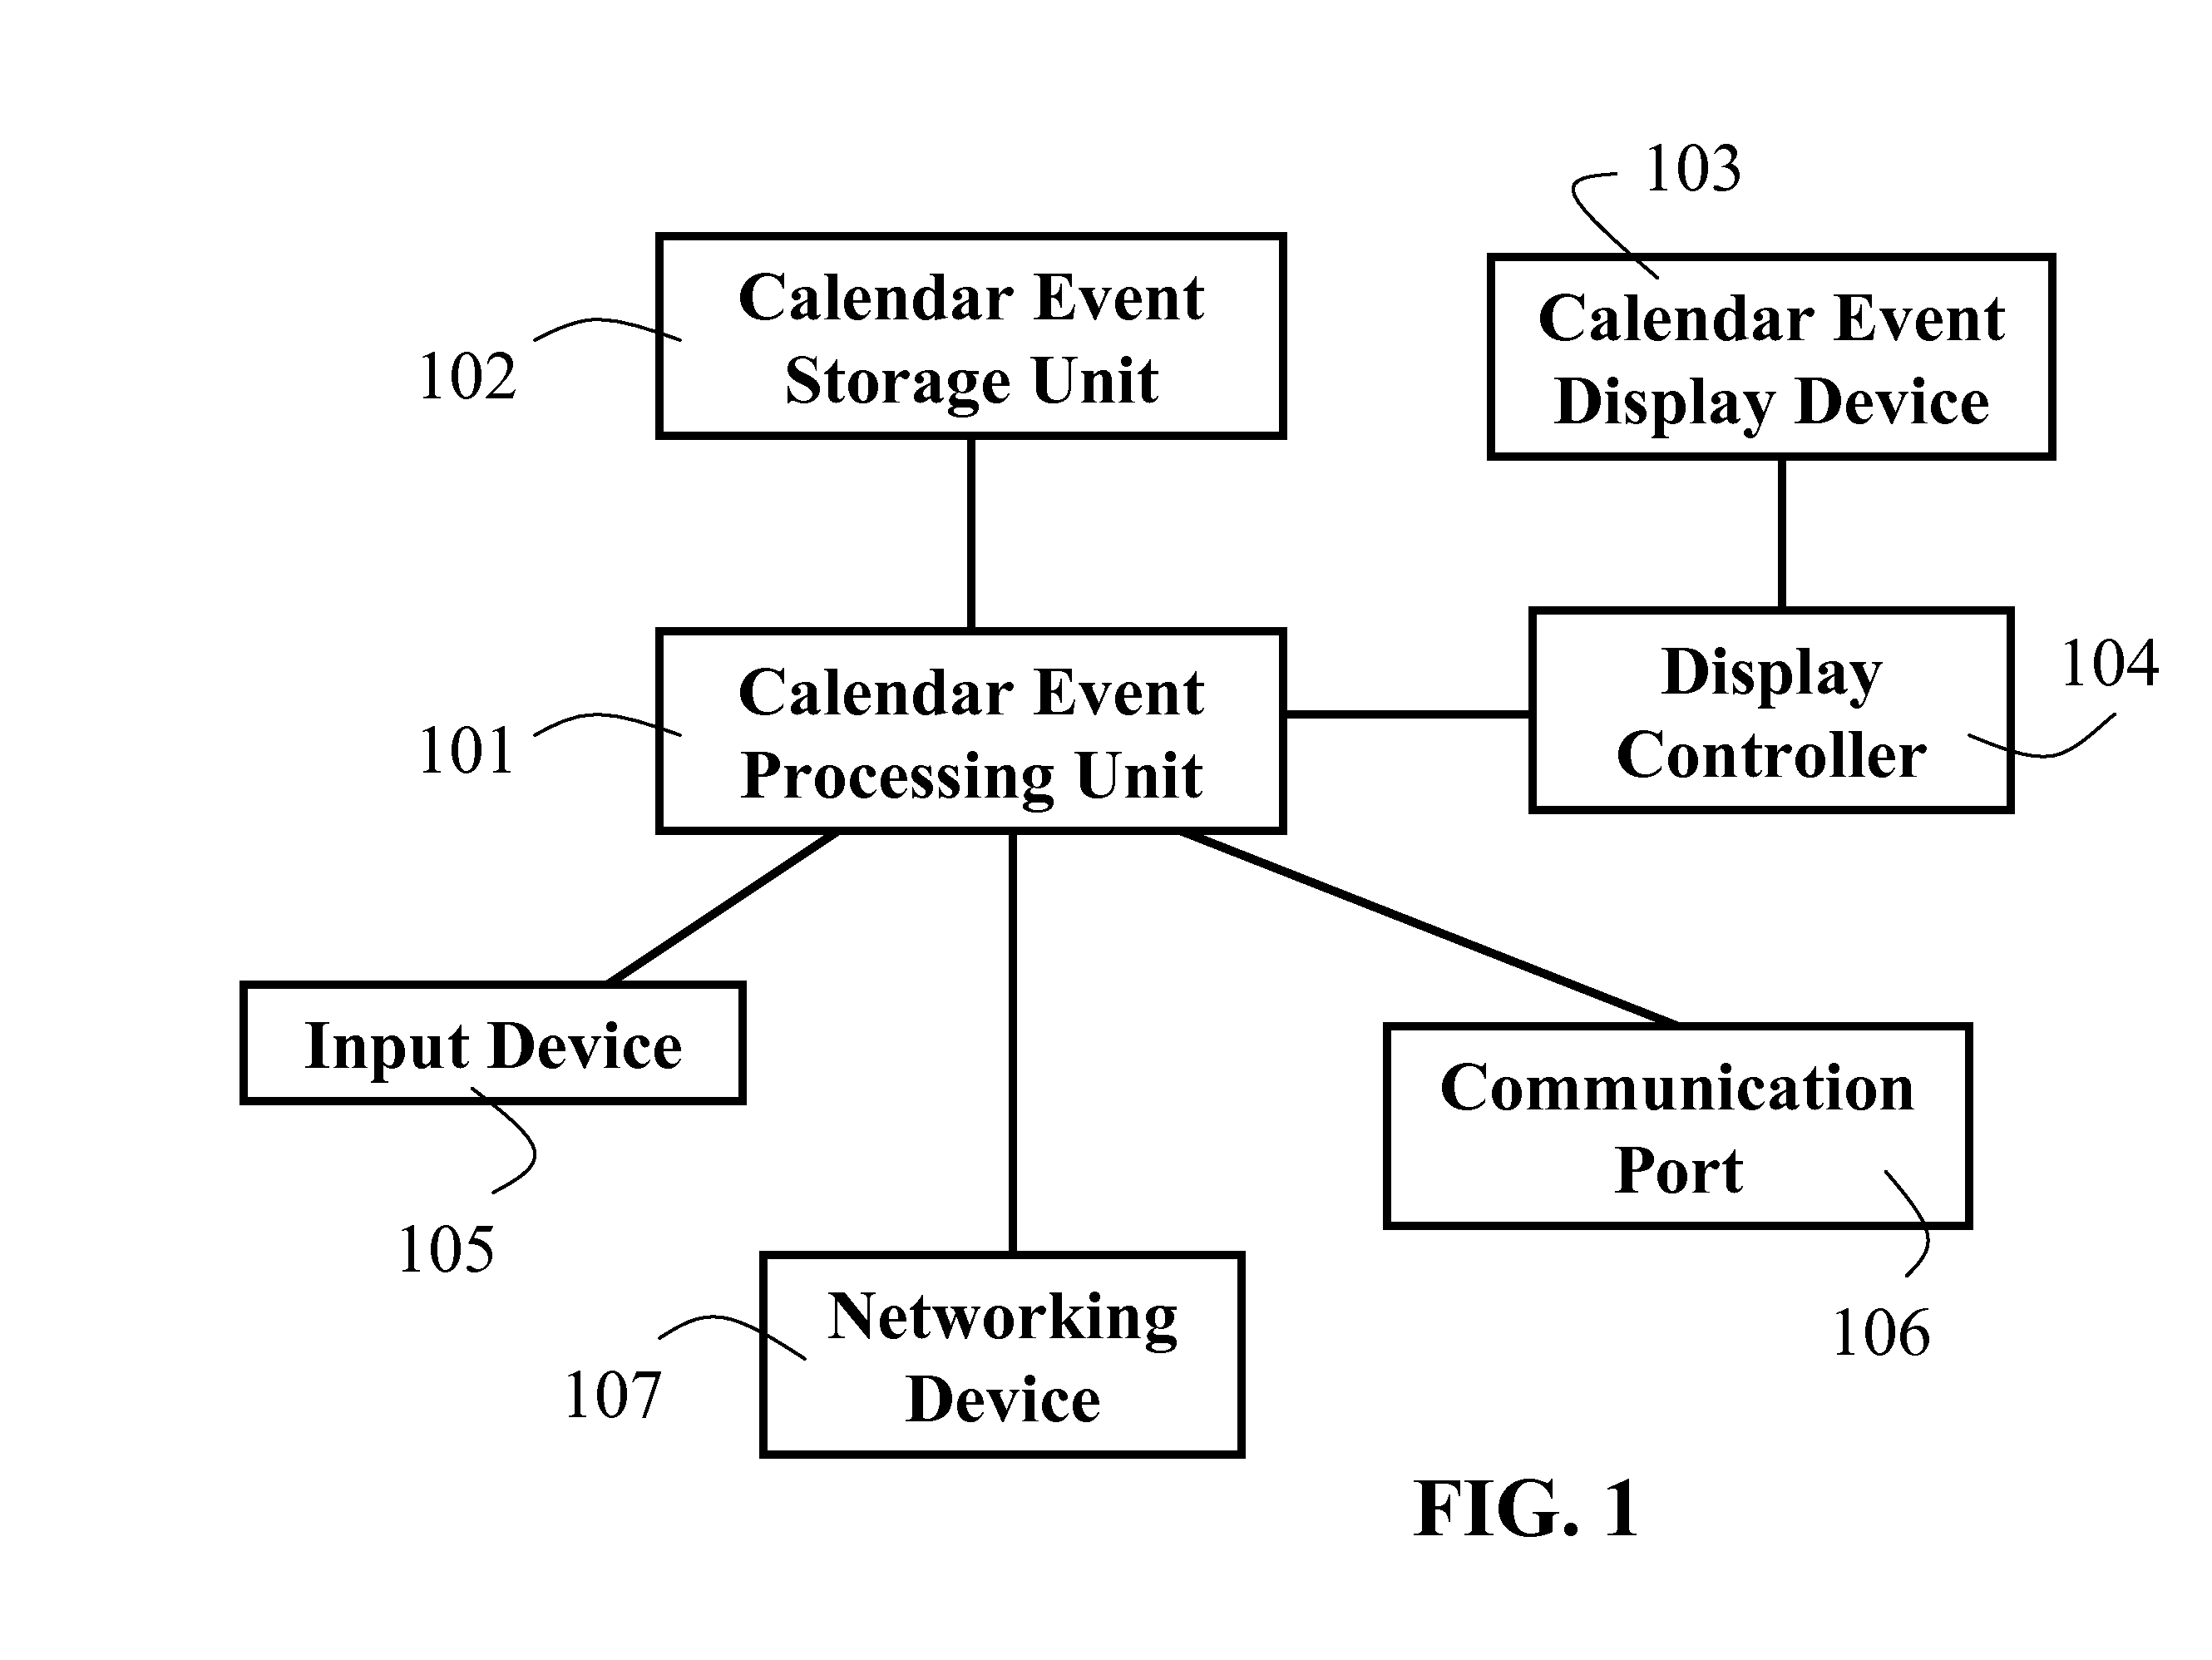 Method And Apparatus Of On-Site Display For Showing Calendar Events Of A Conference Room